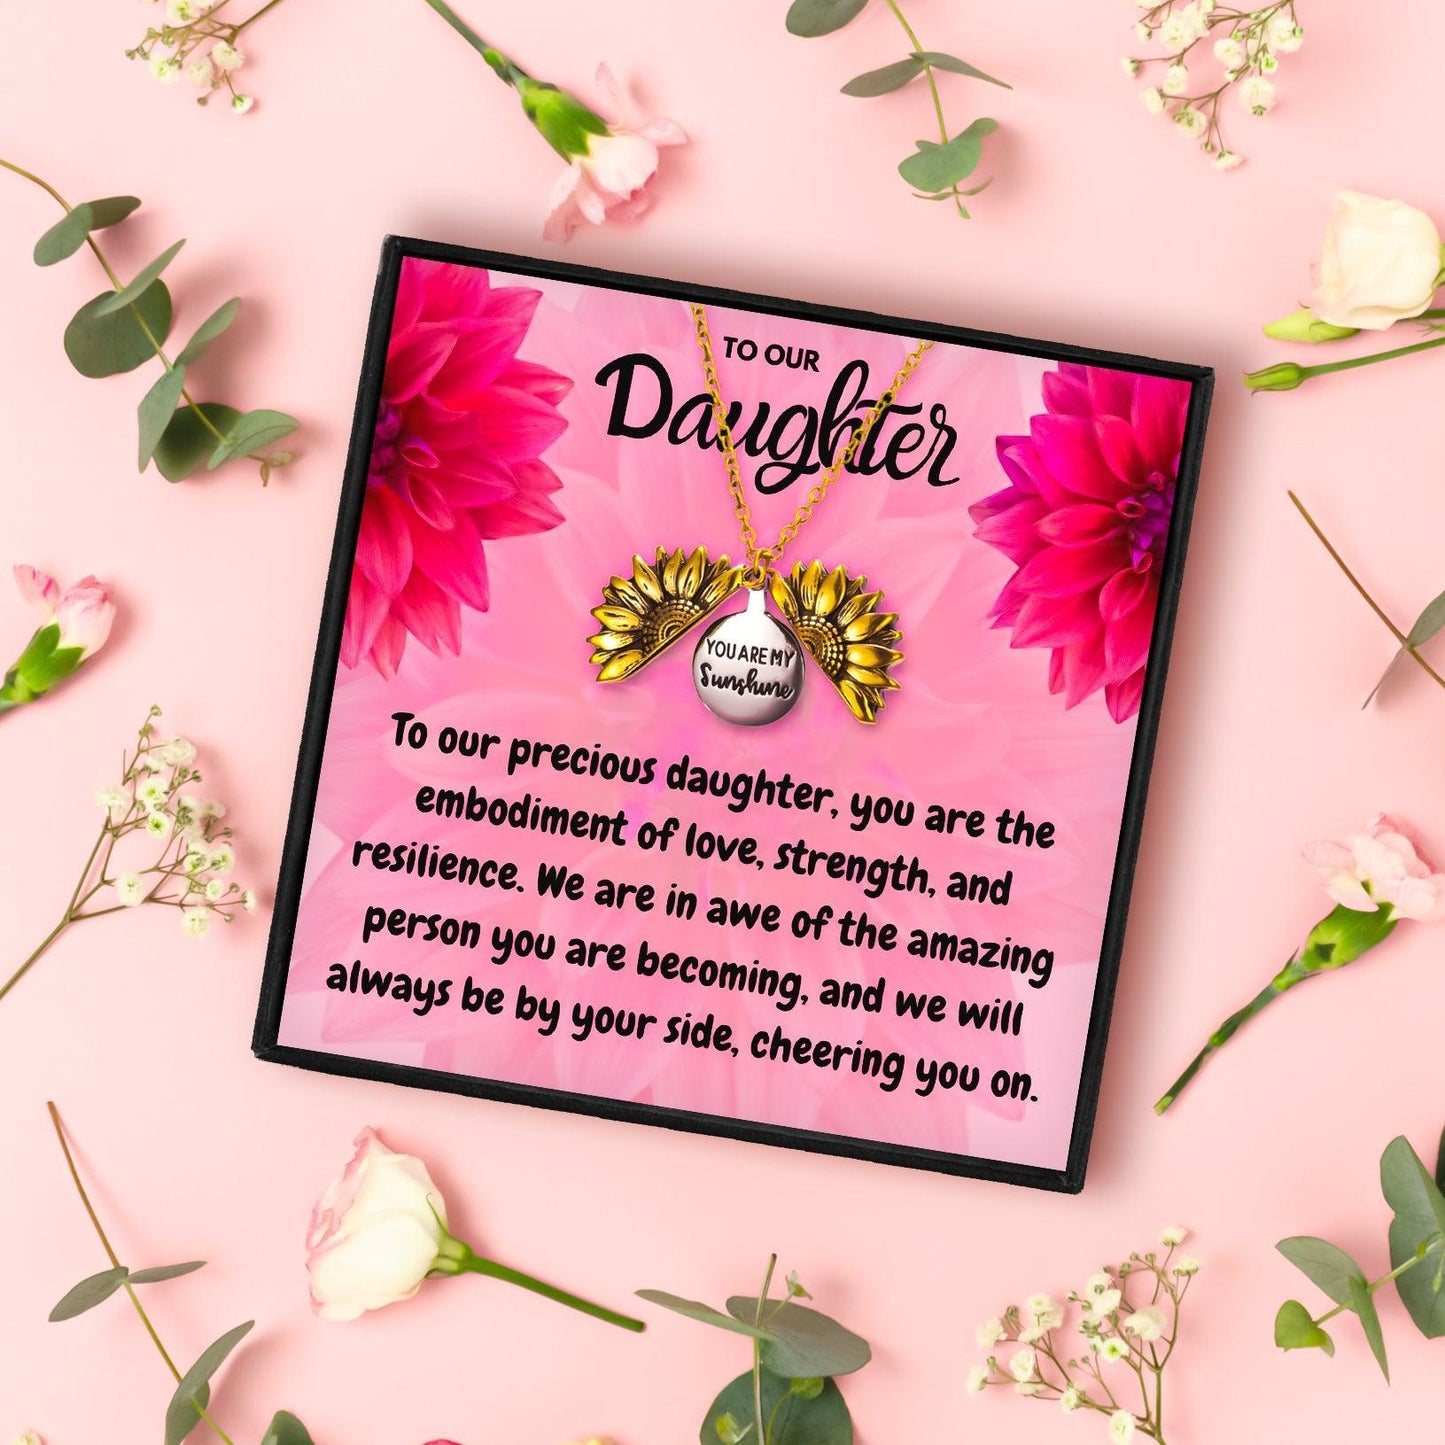 Necklace Gift for Daughter from Mom and Dad in 2023 | Necklace Gift for Daughter from Mom and Dad - undefined | daughter gift ideas, Daughter Necklace, Meaningful Daughter Necklaces, Mother Daughter Necklace, To my daughter necklace, To my daughter necklace from mom | From Hunny Life | hunnylife.com